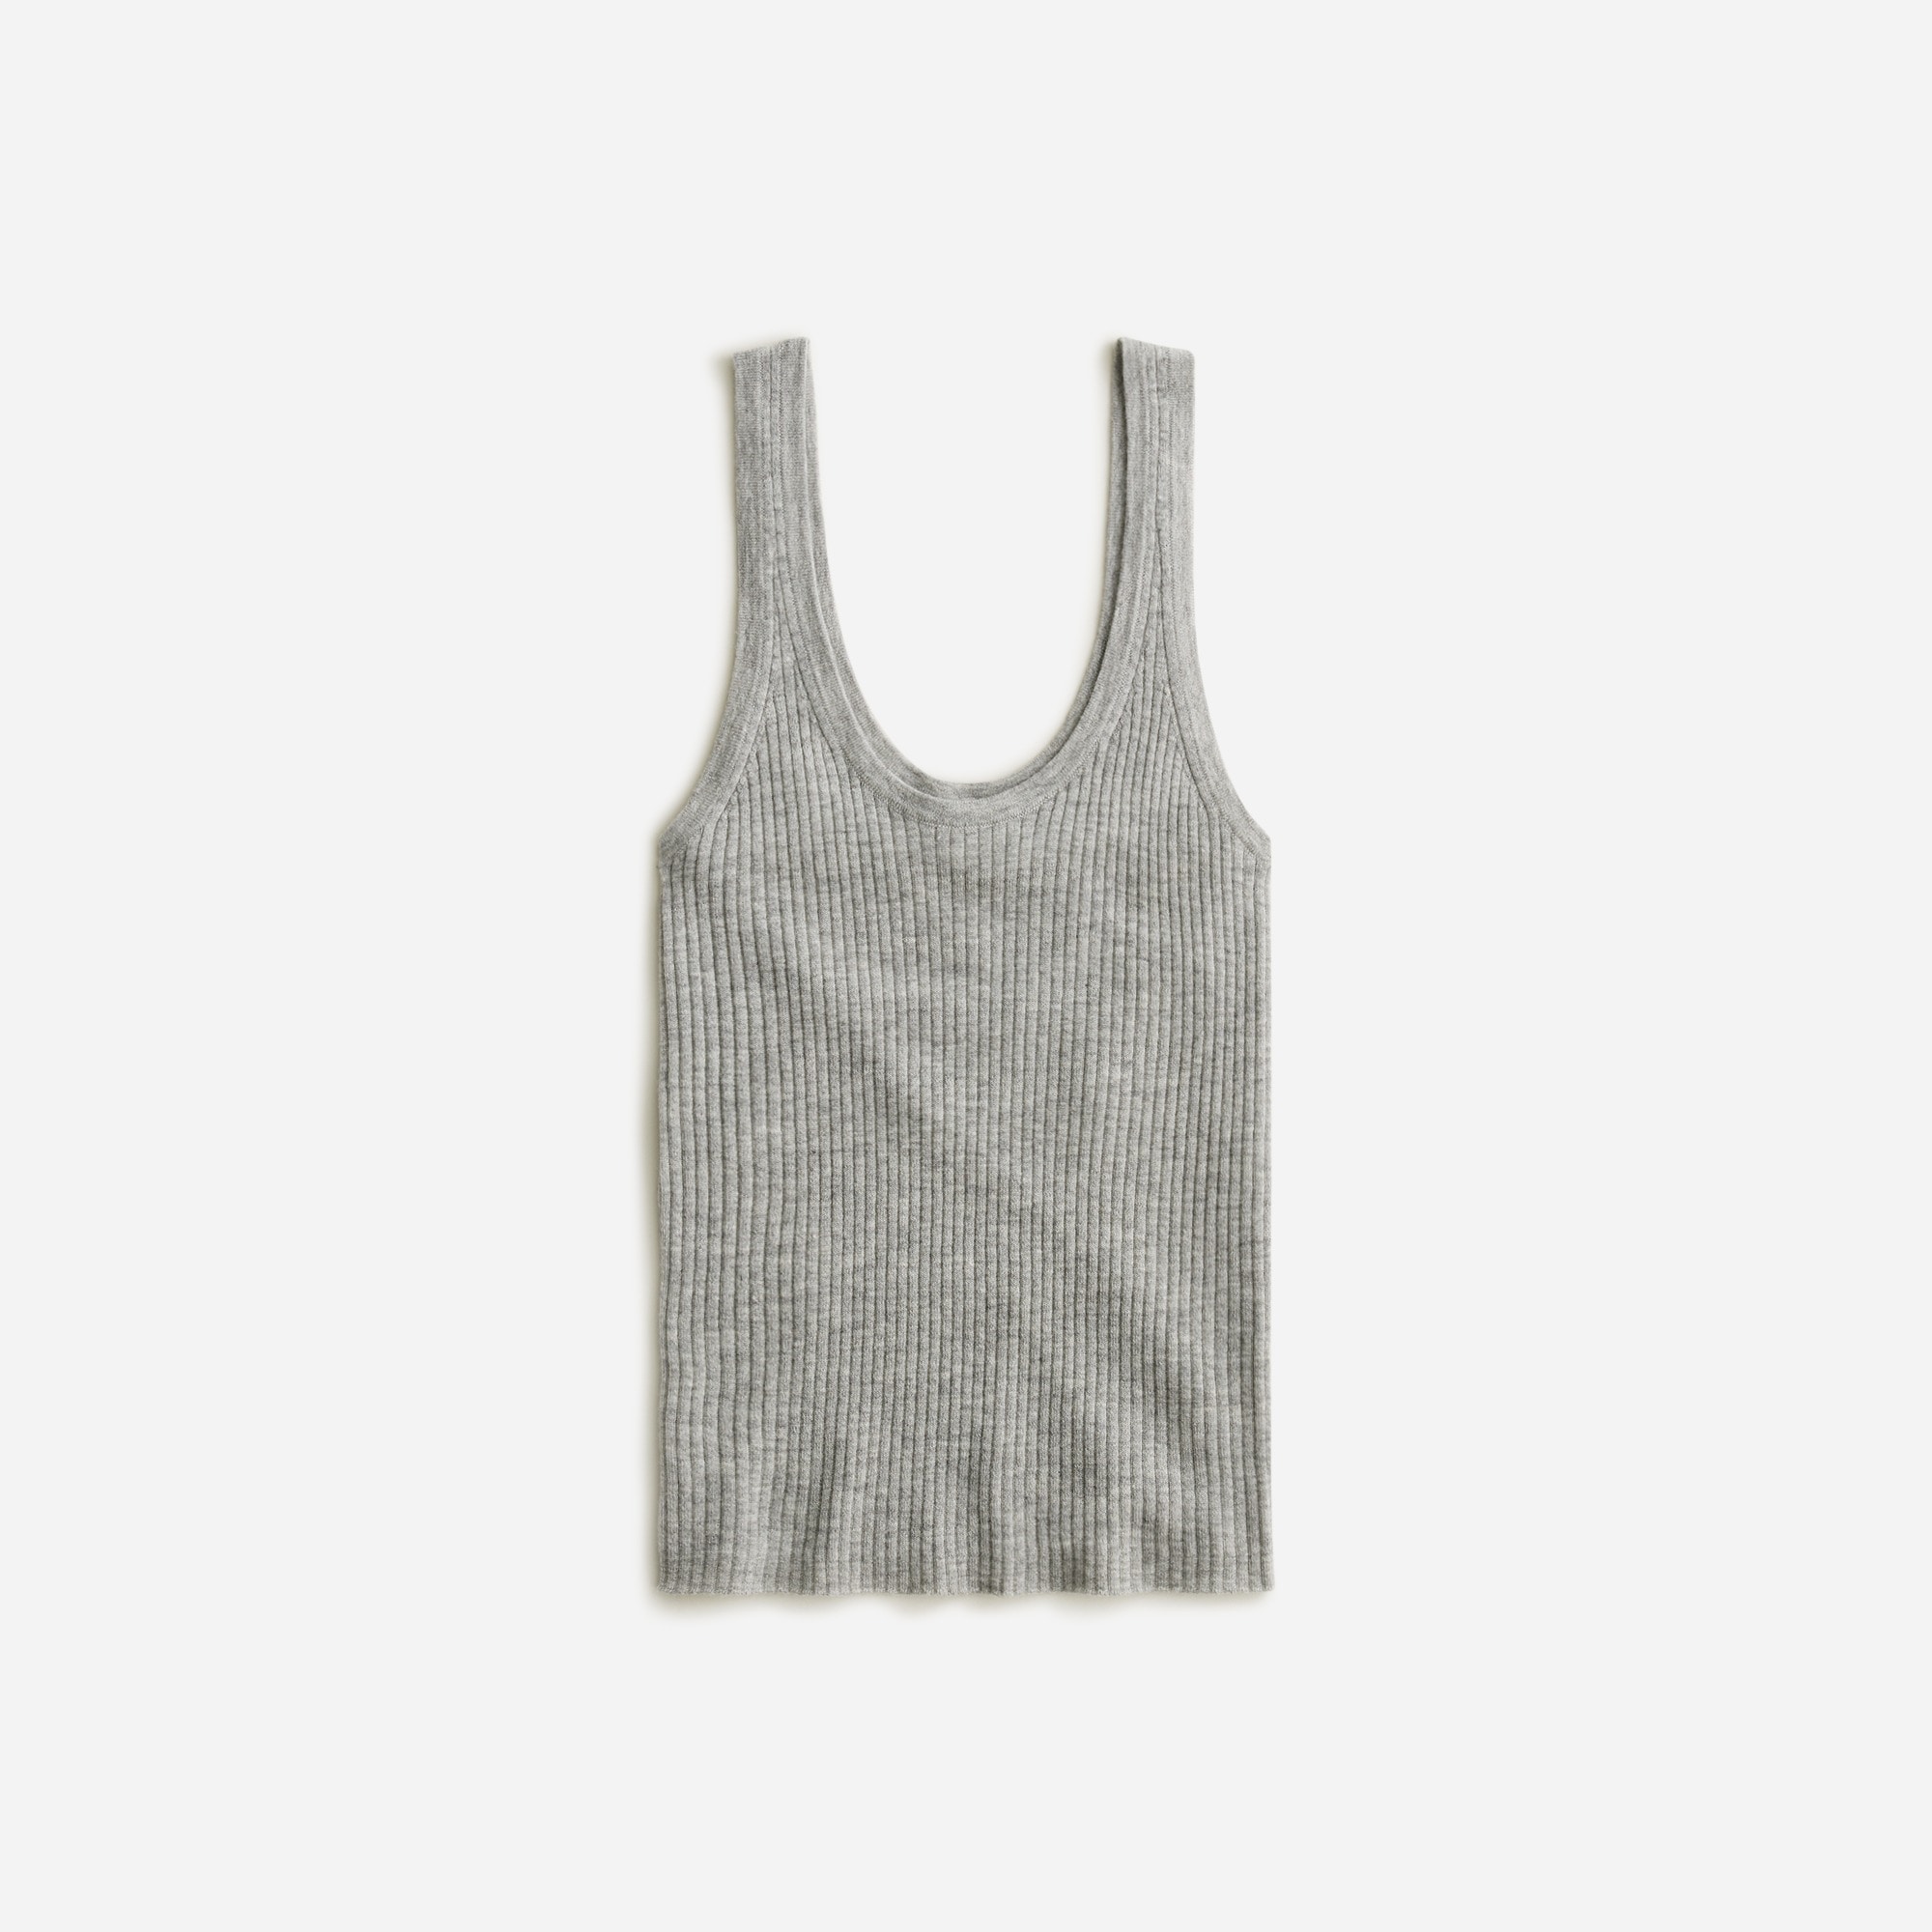  Featherweight cashmere ribbed tank top